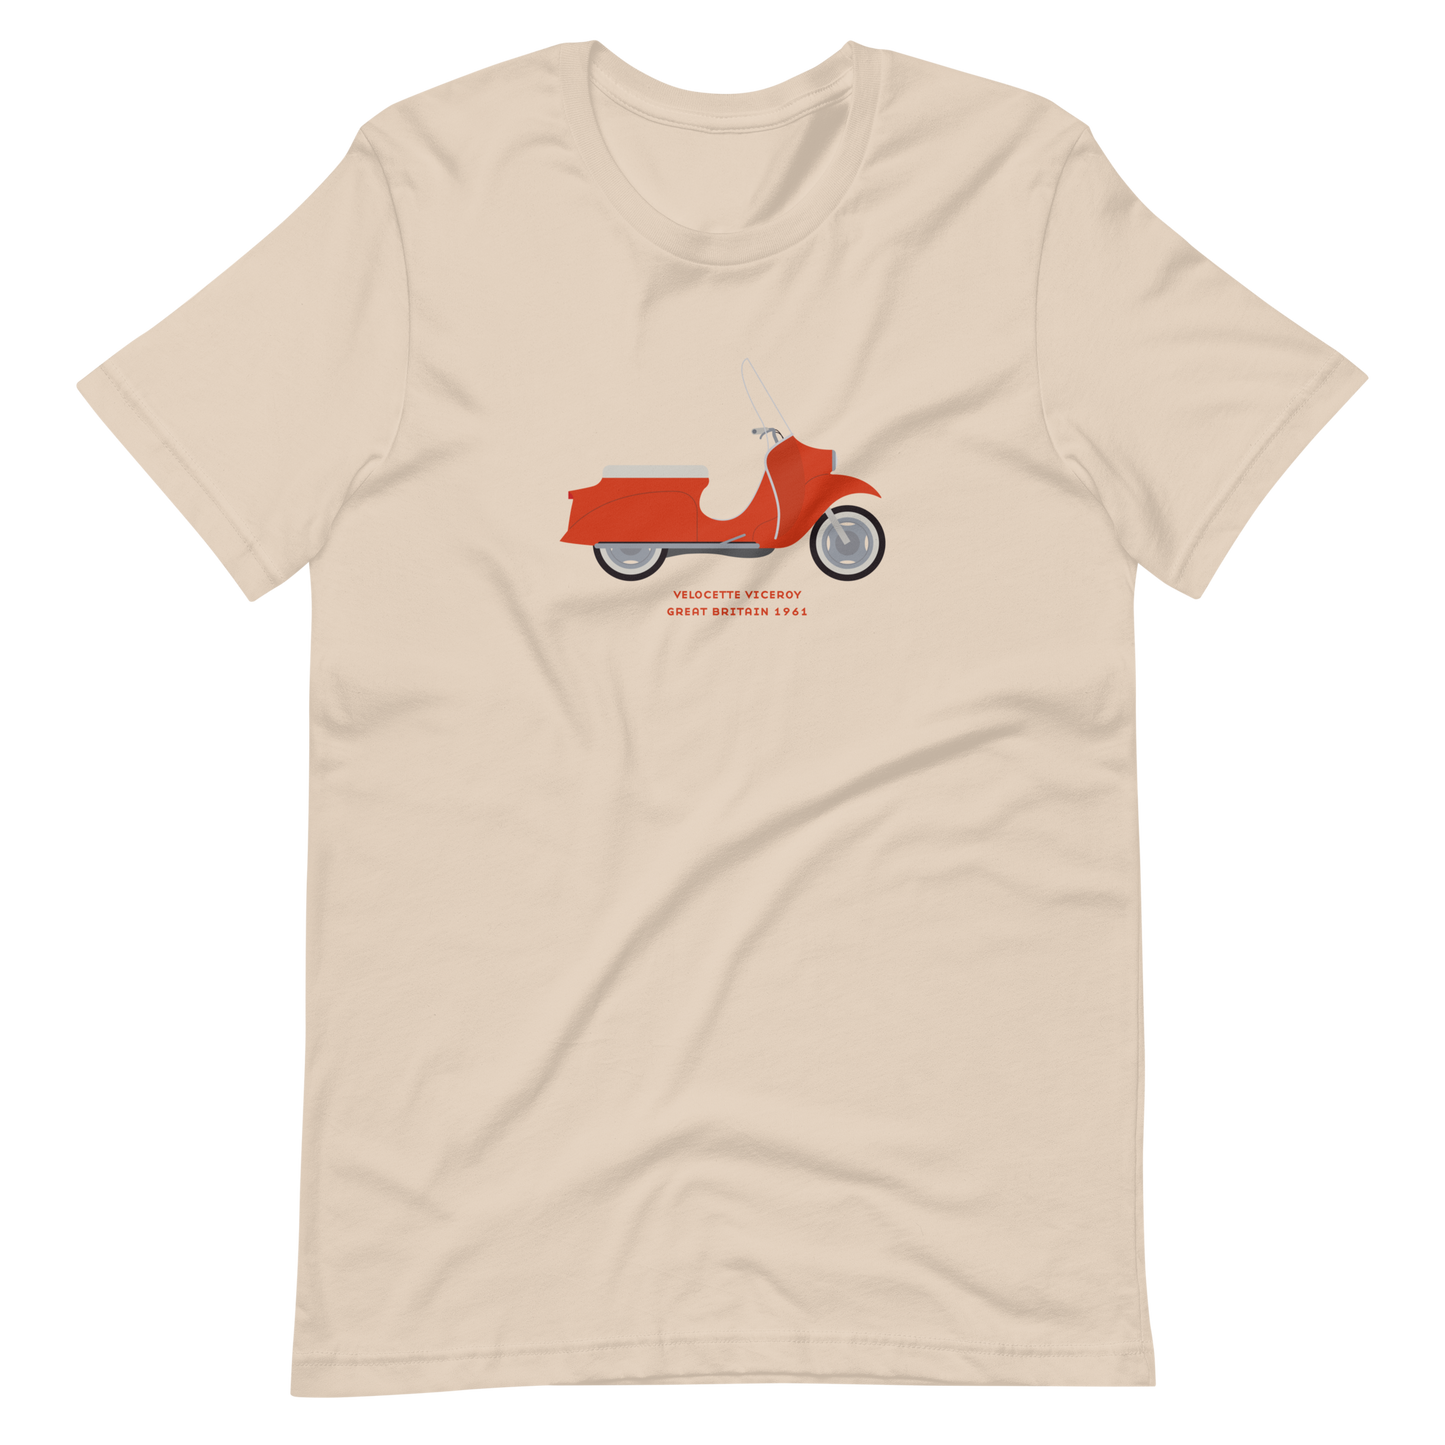 T-Shirt Scooter Velocette Viceroy, Great Britain 1961